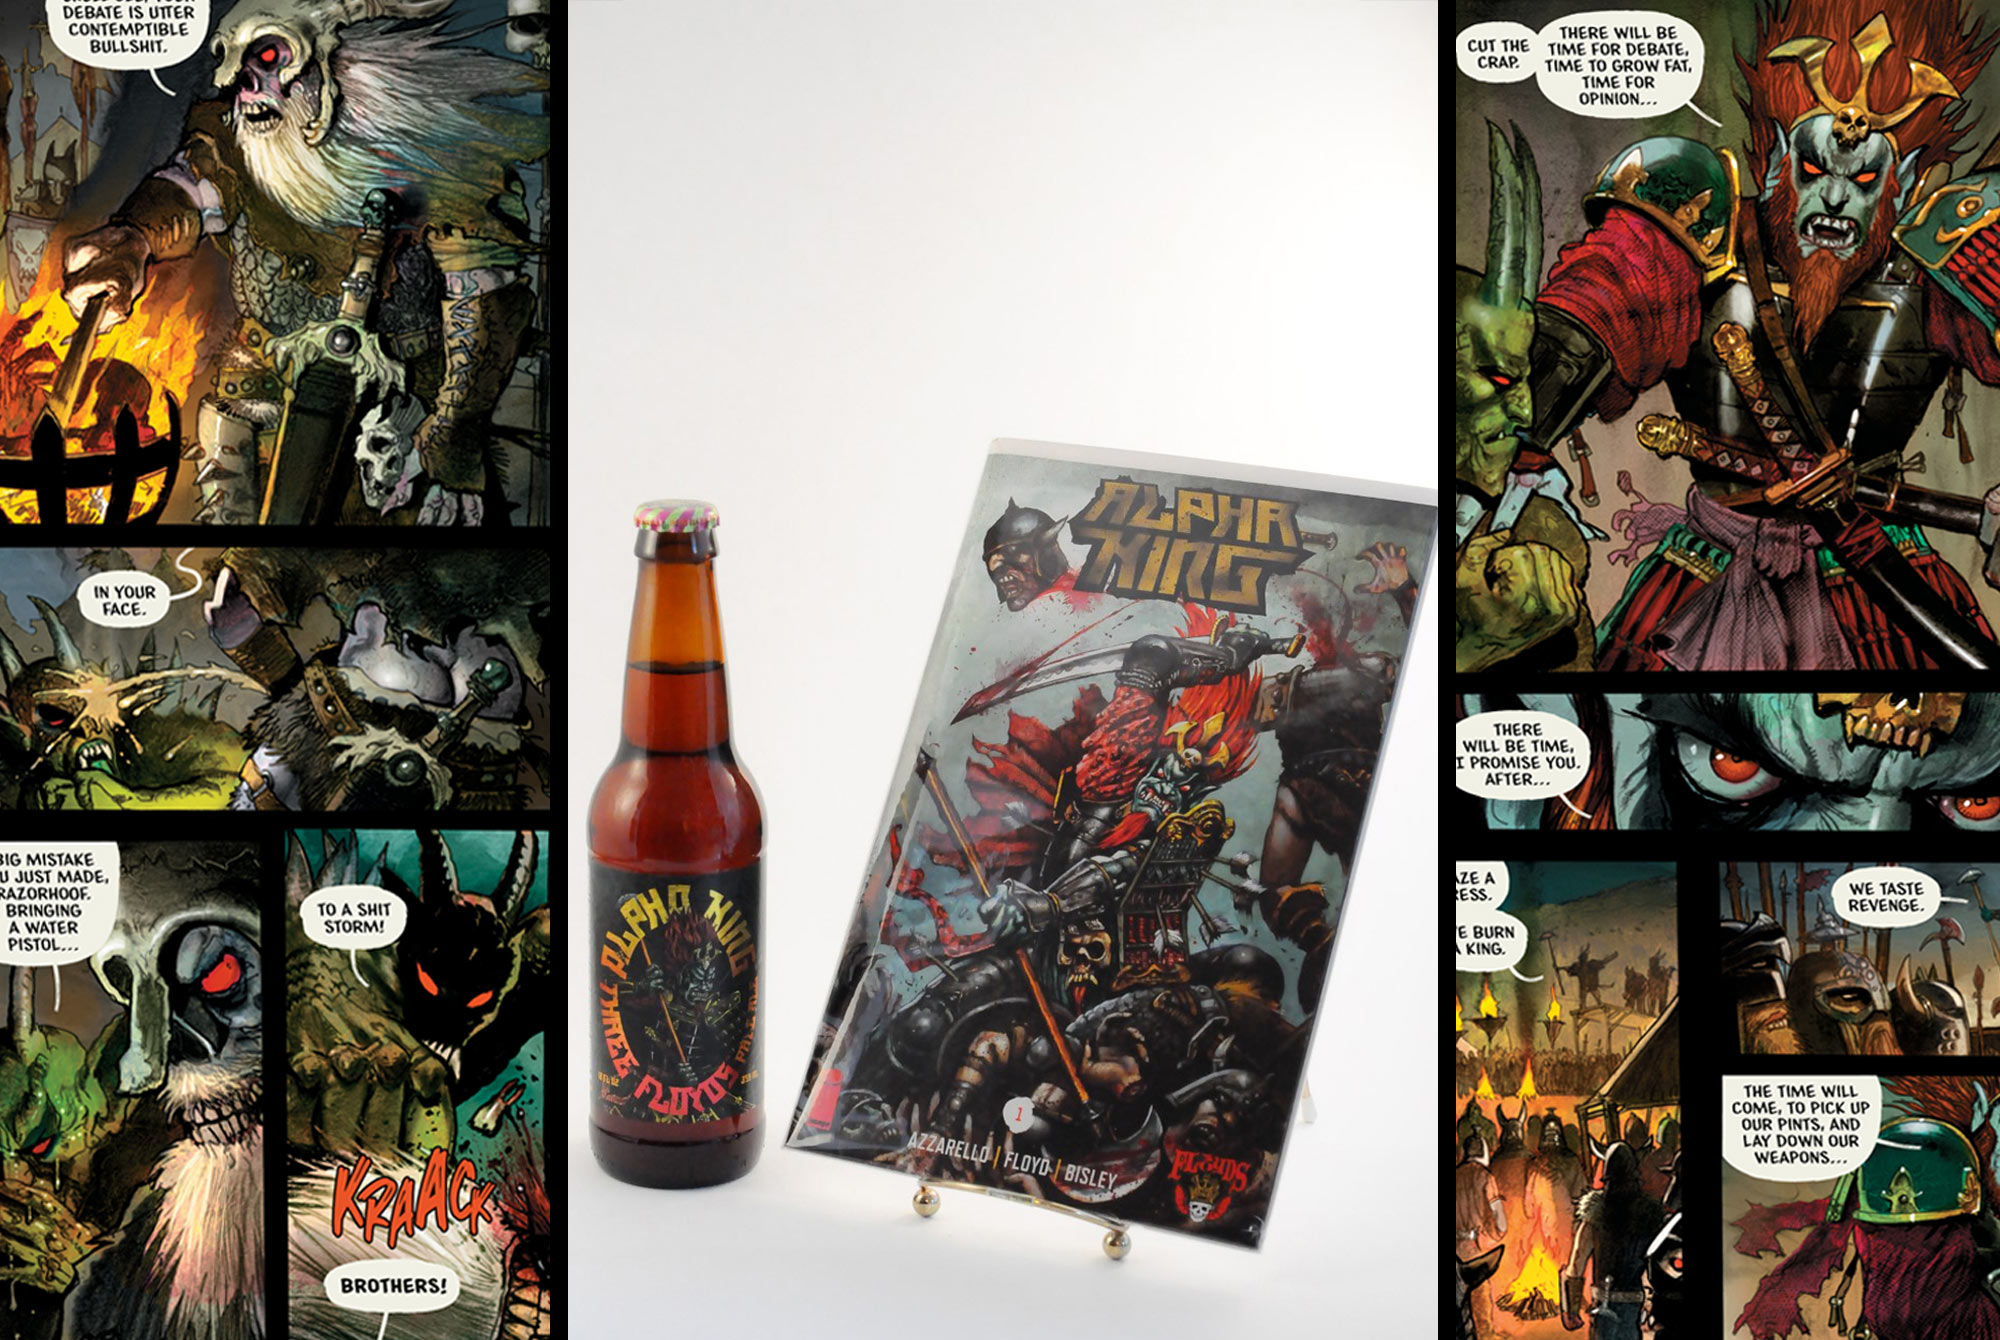 The Comic Book Based on Craft Beer